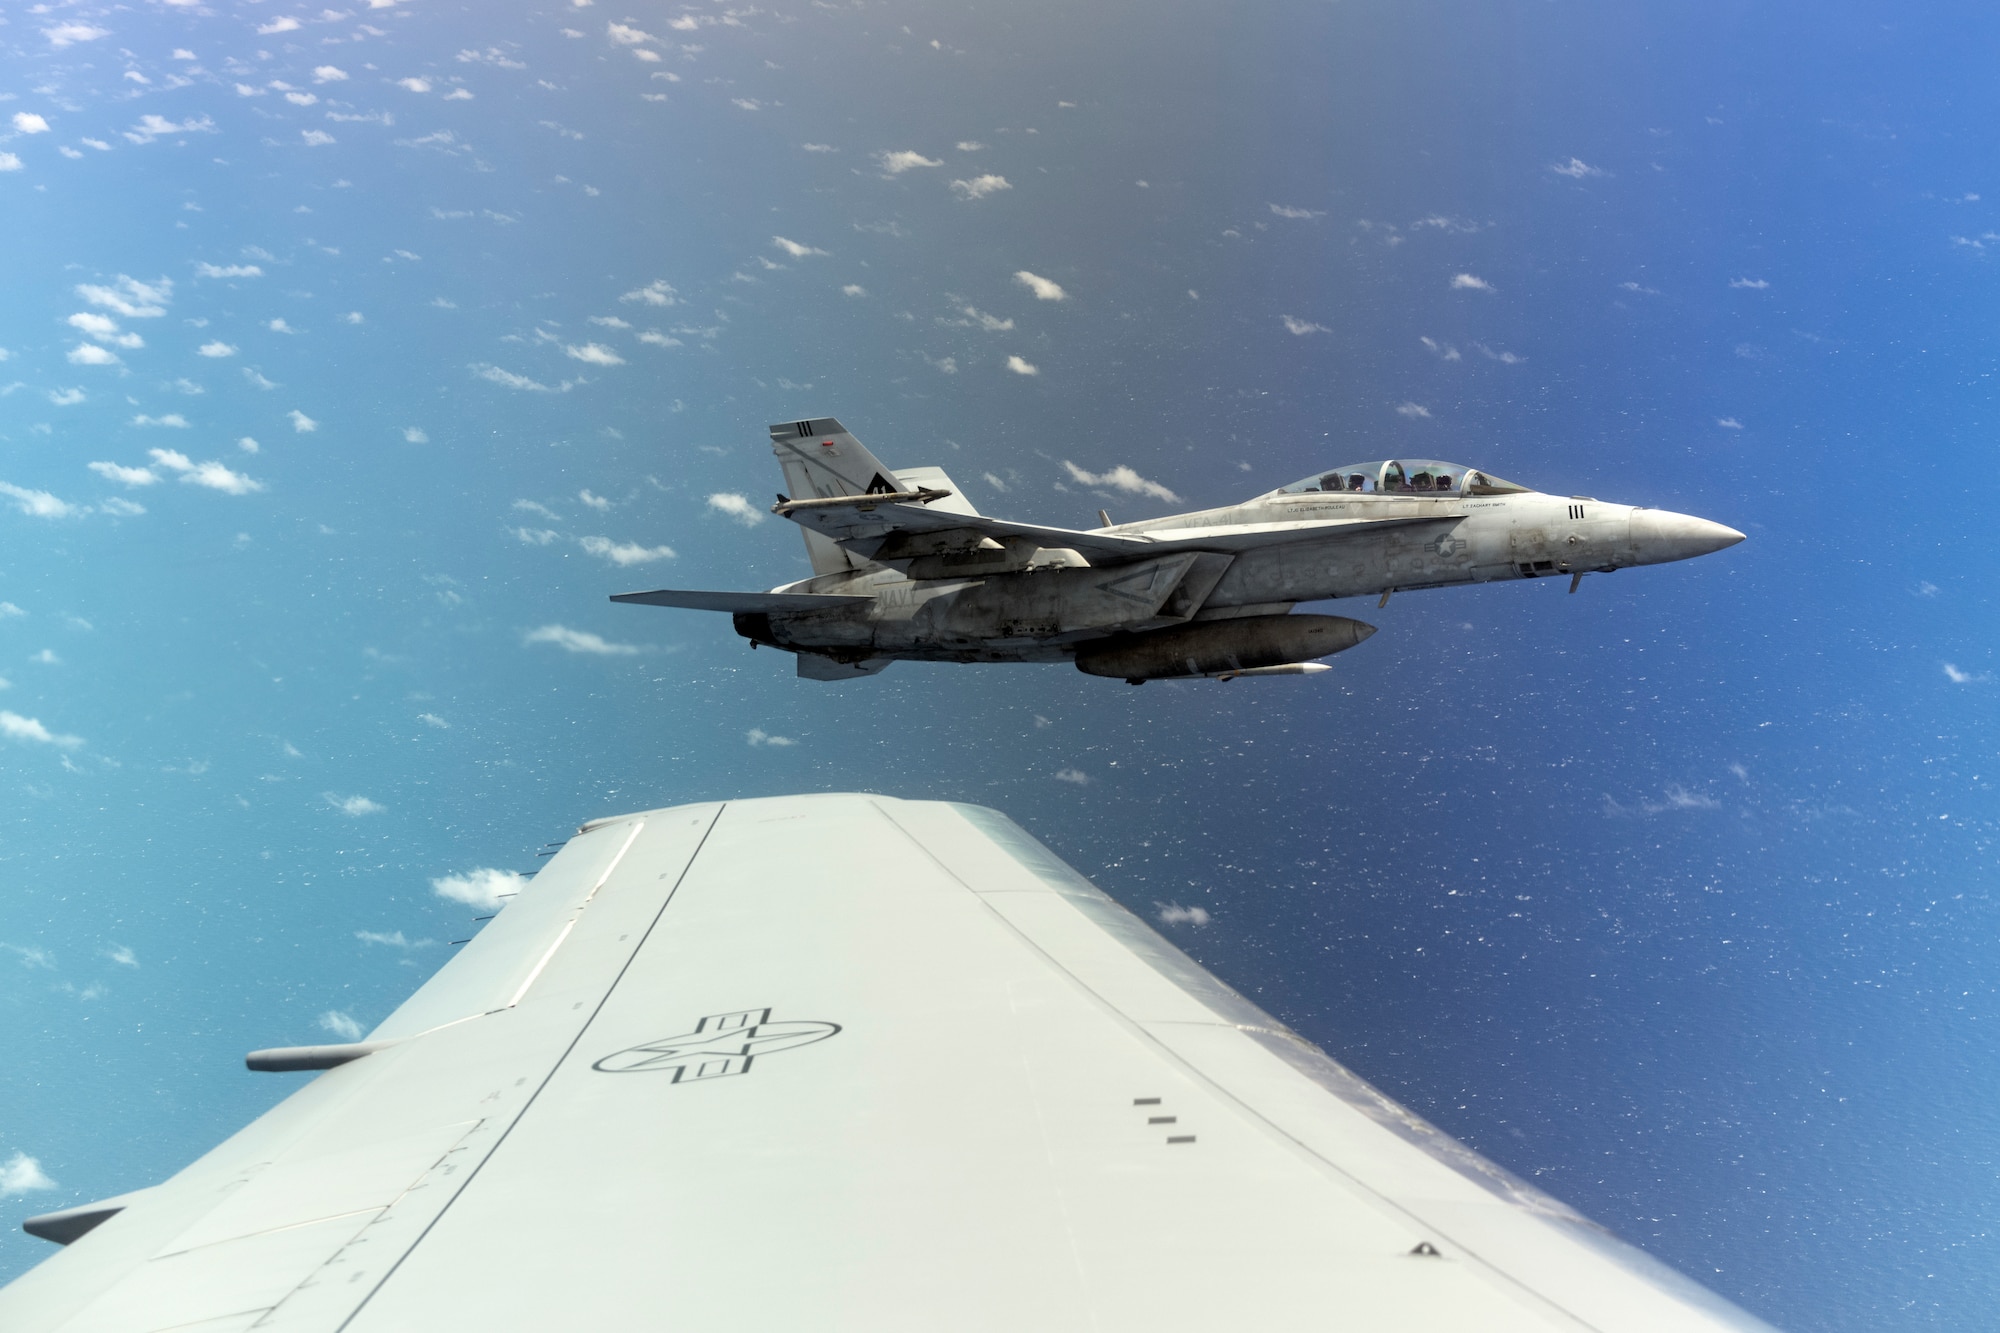 A U.S. Navy F/A-18 Hornet banks left in formation alongside a McConnell Air Force Base, Kansas, KC-46A Pegasus June 6, 2022, during Air Mobility Command’s Employment Concept Exercise 22-06. The F/A-18 just received fuel and is waiting for his wingman to finish his refuel by the Pegasus. McConnell aircrew and tankers provided aerial refueling in the Indo-Pacific Theater to practice joint interoperability in a multi-domain environment to build real-world proficiency and readiness. (U.S. Air Force photo by Master Sgt. John Gordinier)